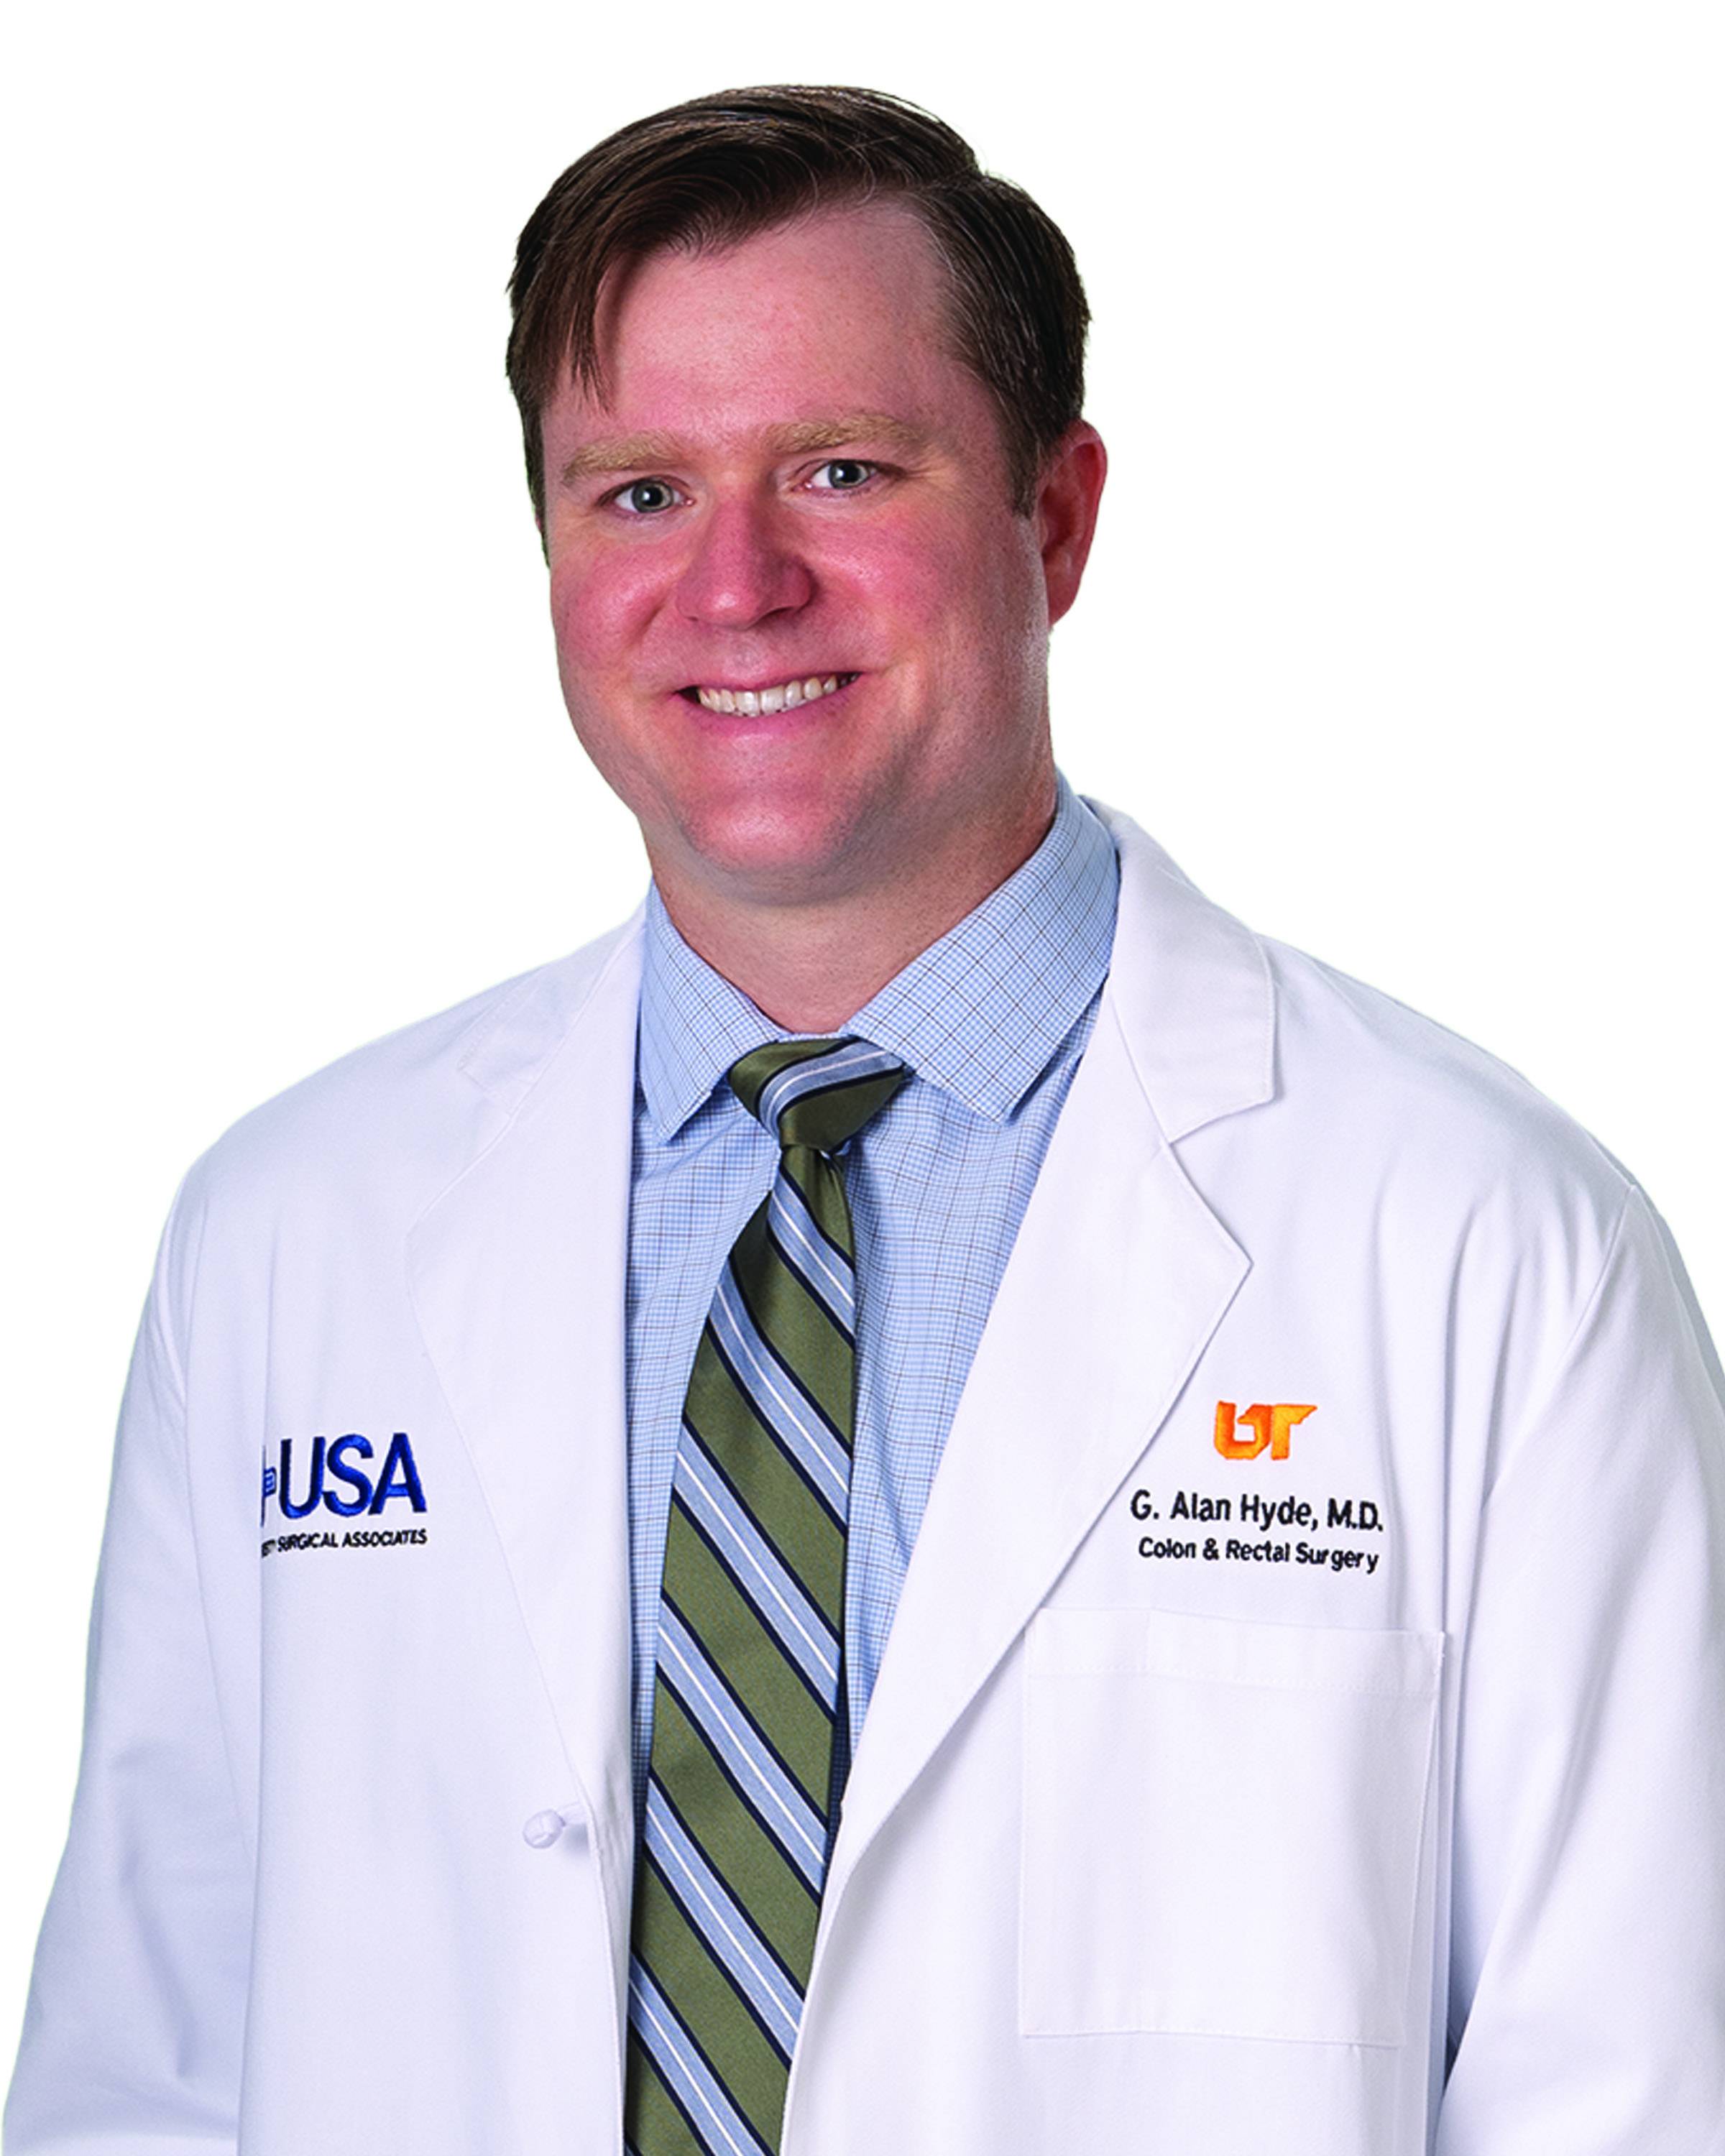 G. Alan Hyde, MD, Faculty, Surgery Residency and Colon and Rectal Surgery Fellowship